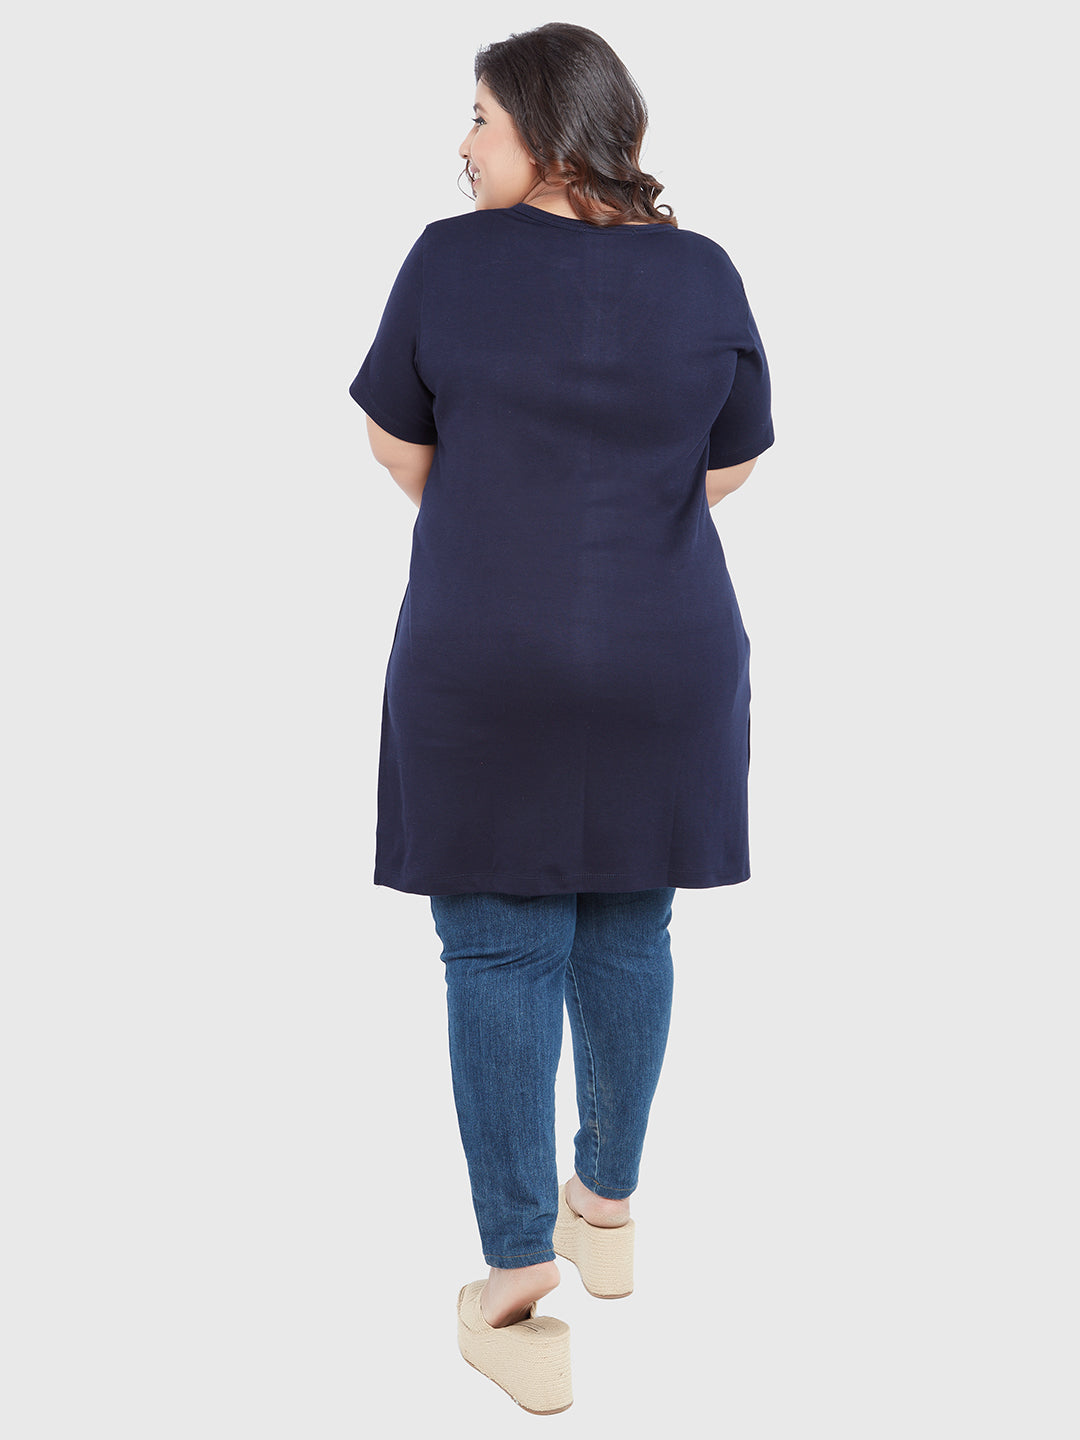 Comfortable Plus Size Half Long Top For Women In Navy Blue